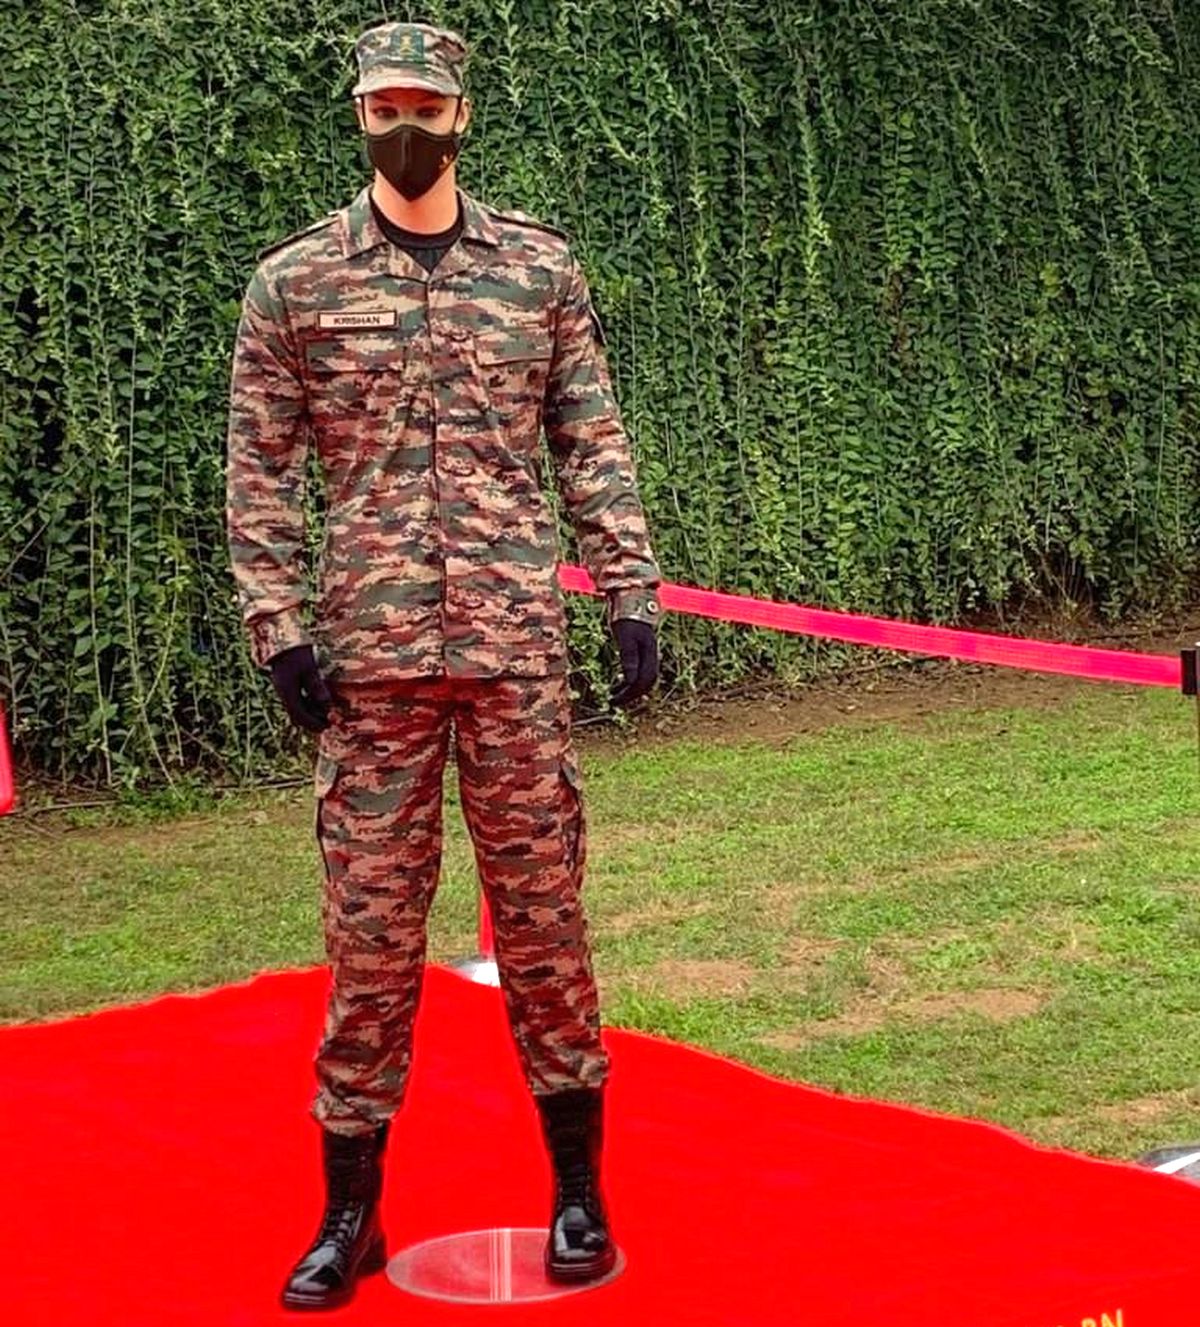 Get ready for Indian Army's new uniform on Jan 15 - Rediff.com